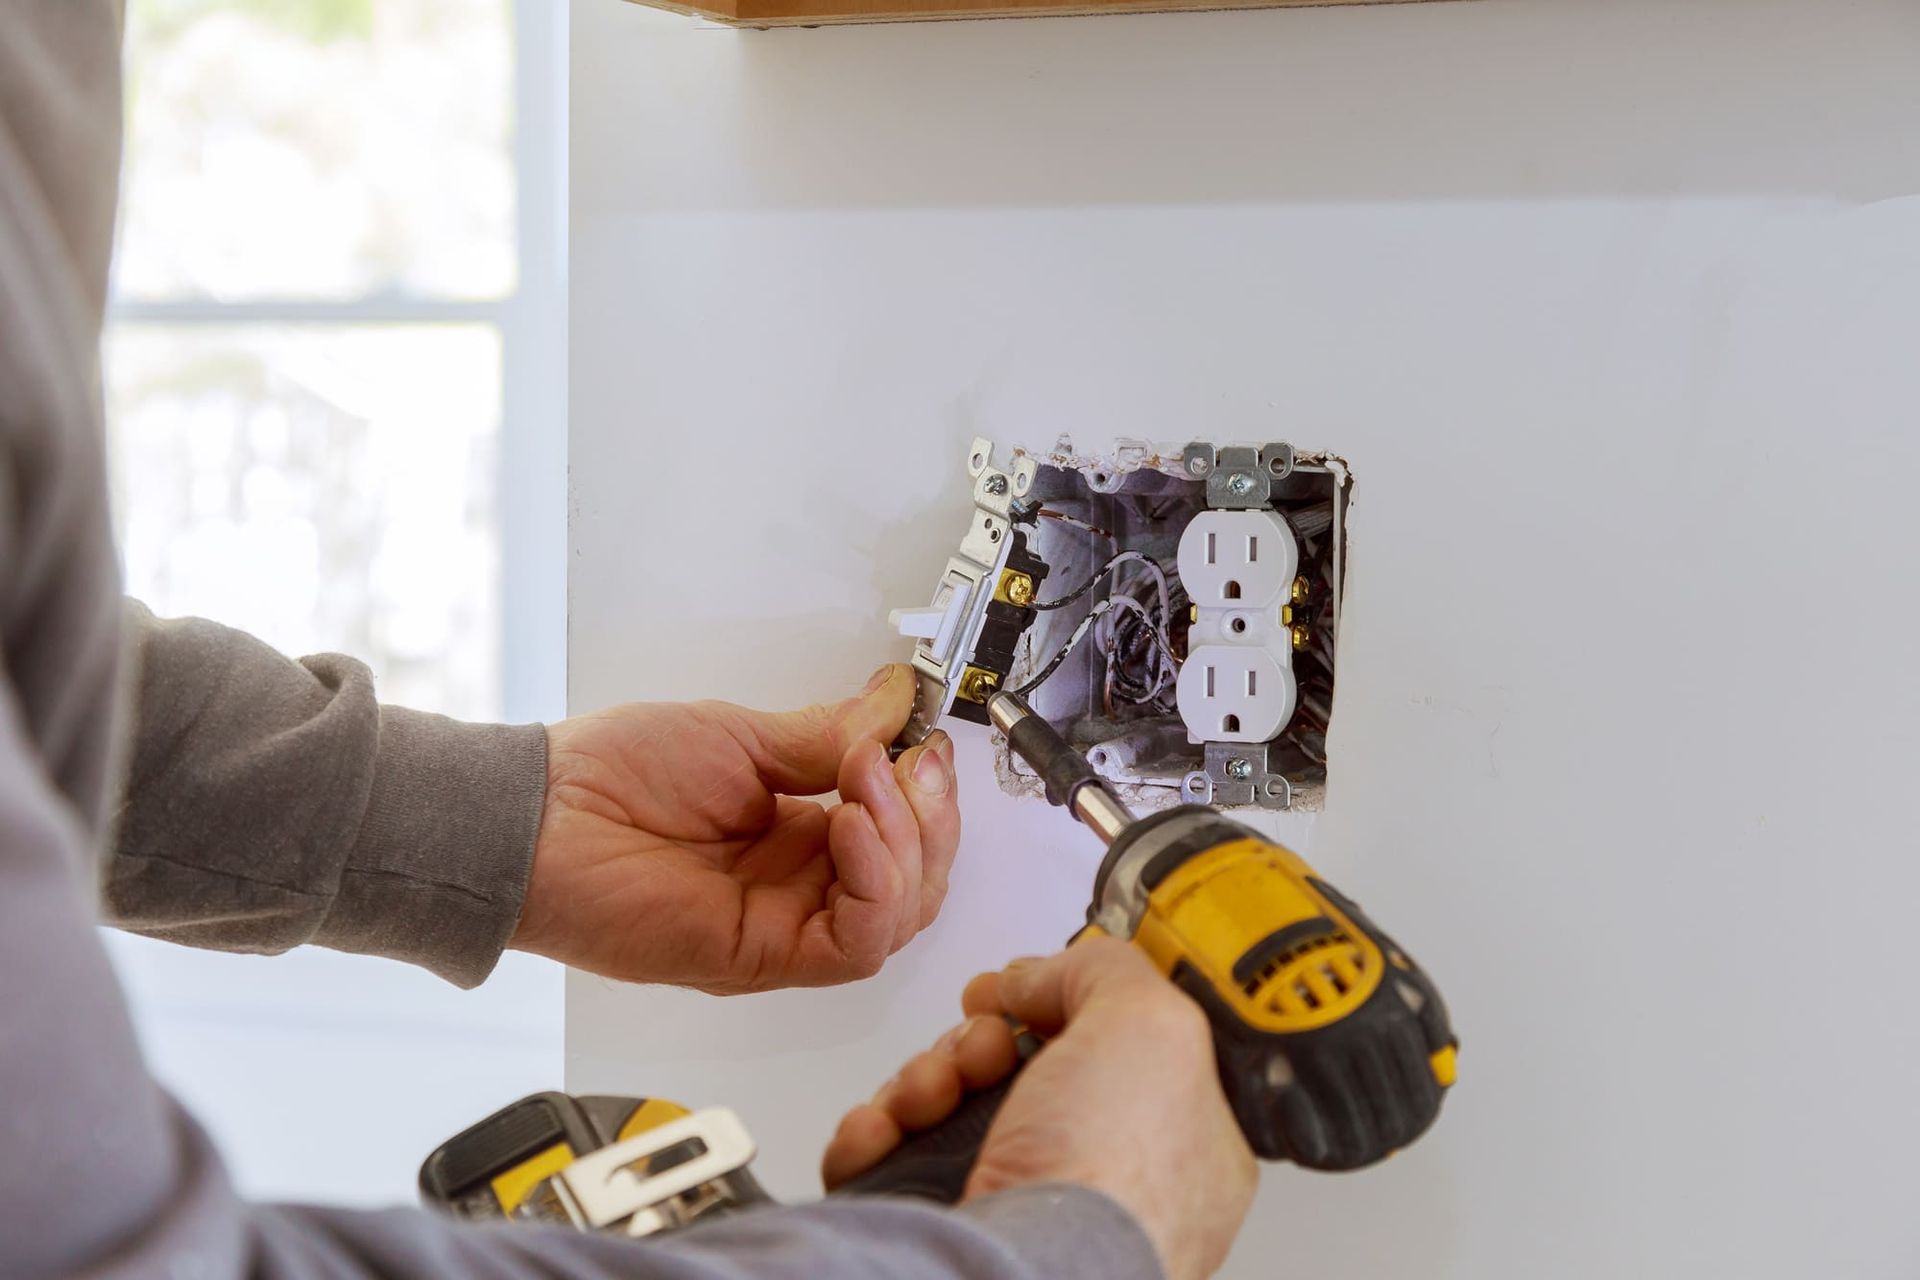 A man is installing an electrical outlet on a wall with a drill.